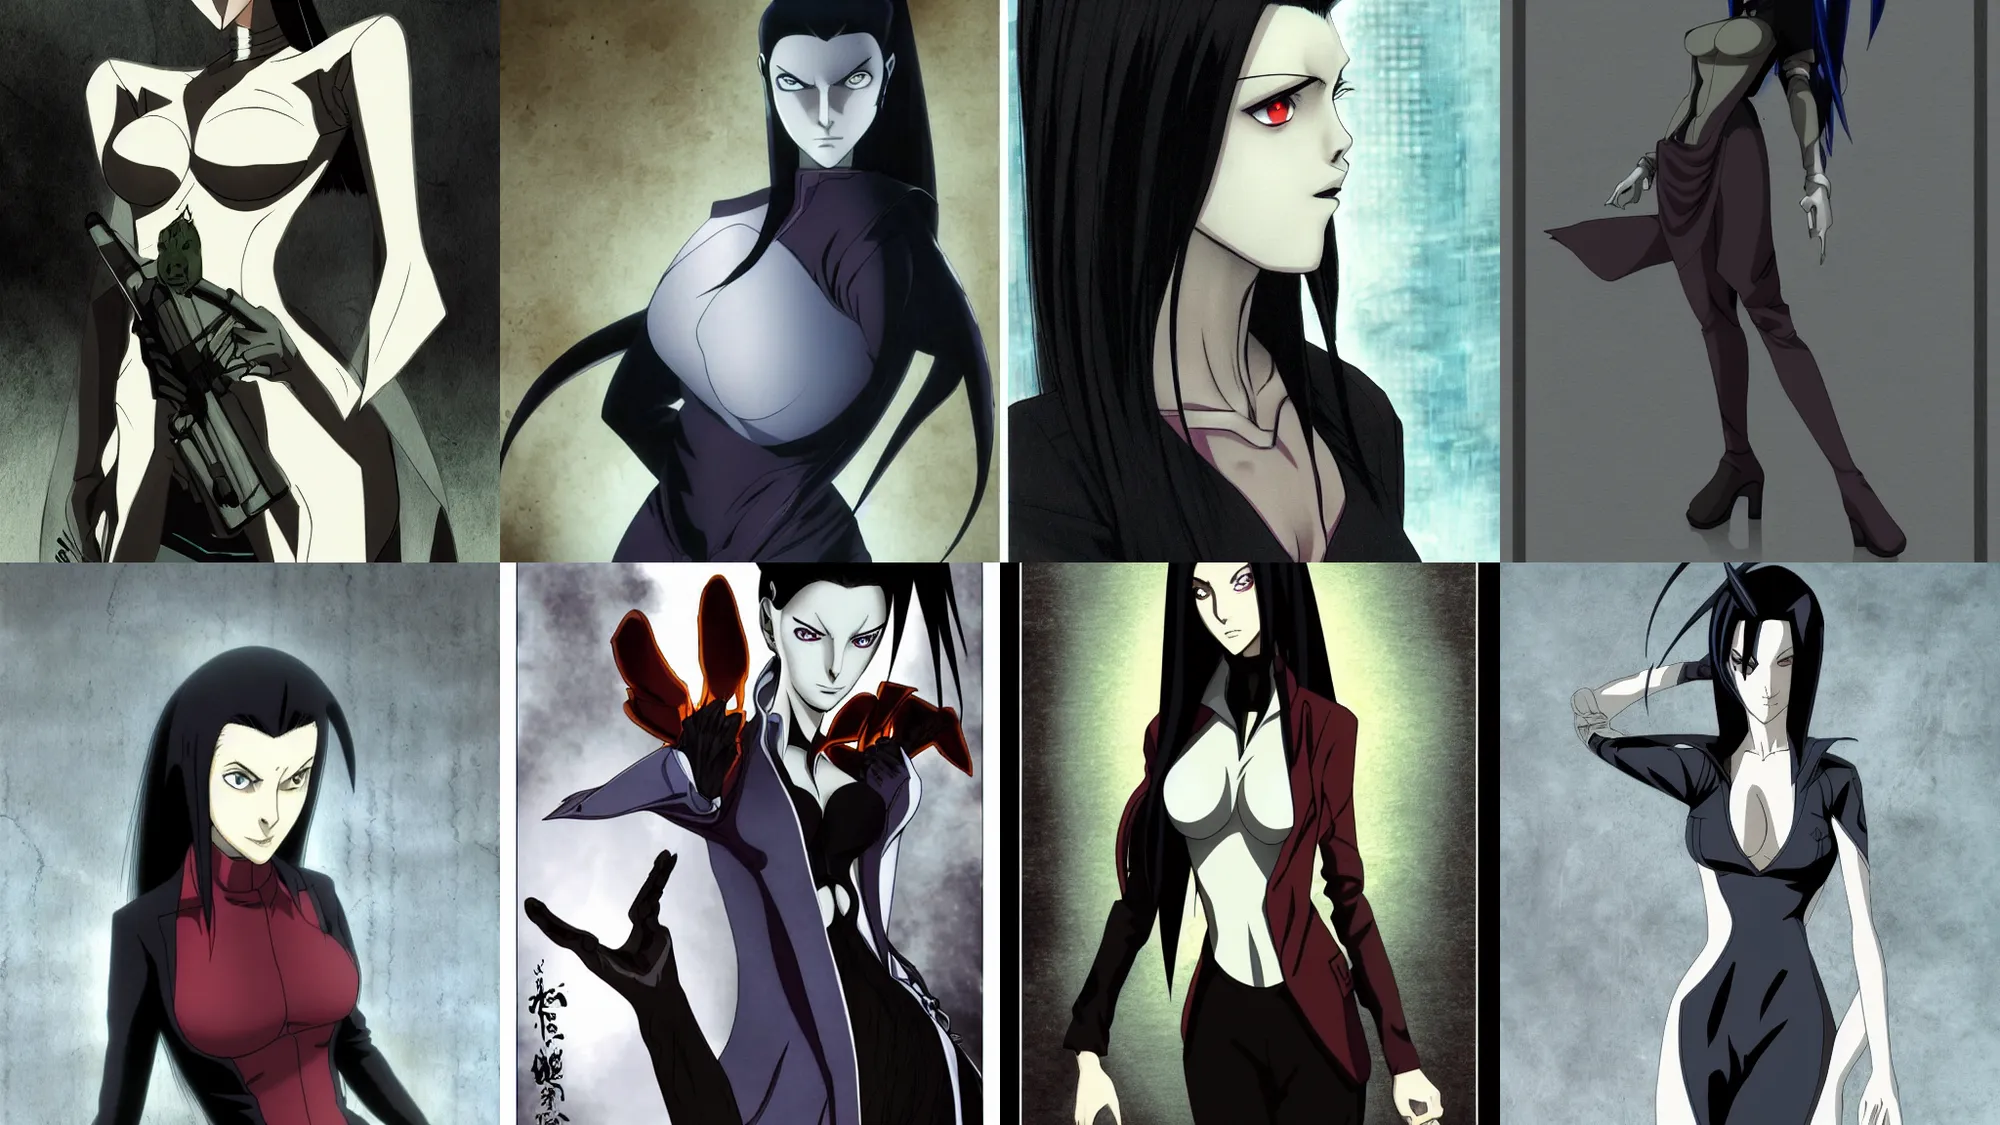 Re-L Mayer form Ergo Proxy by Earl Moran, and Bolles, Stable Diffusion